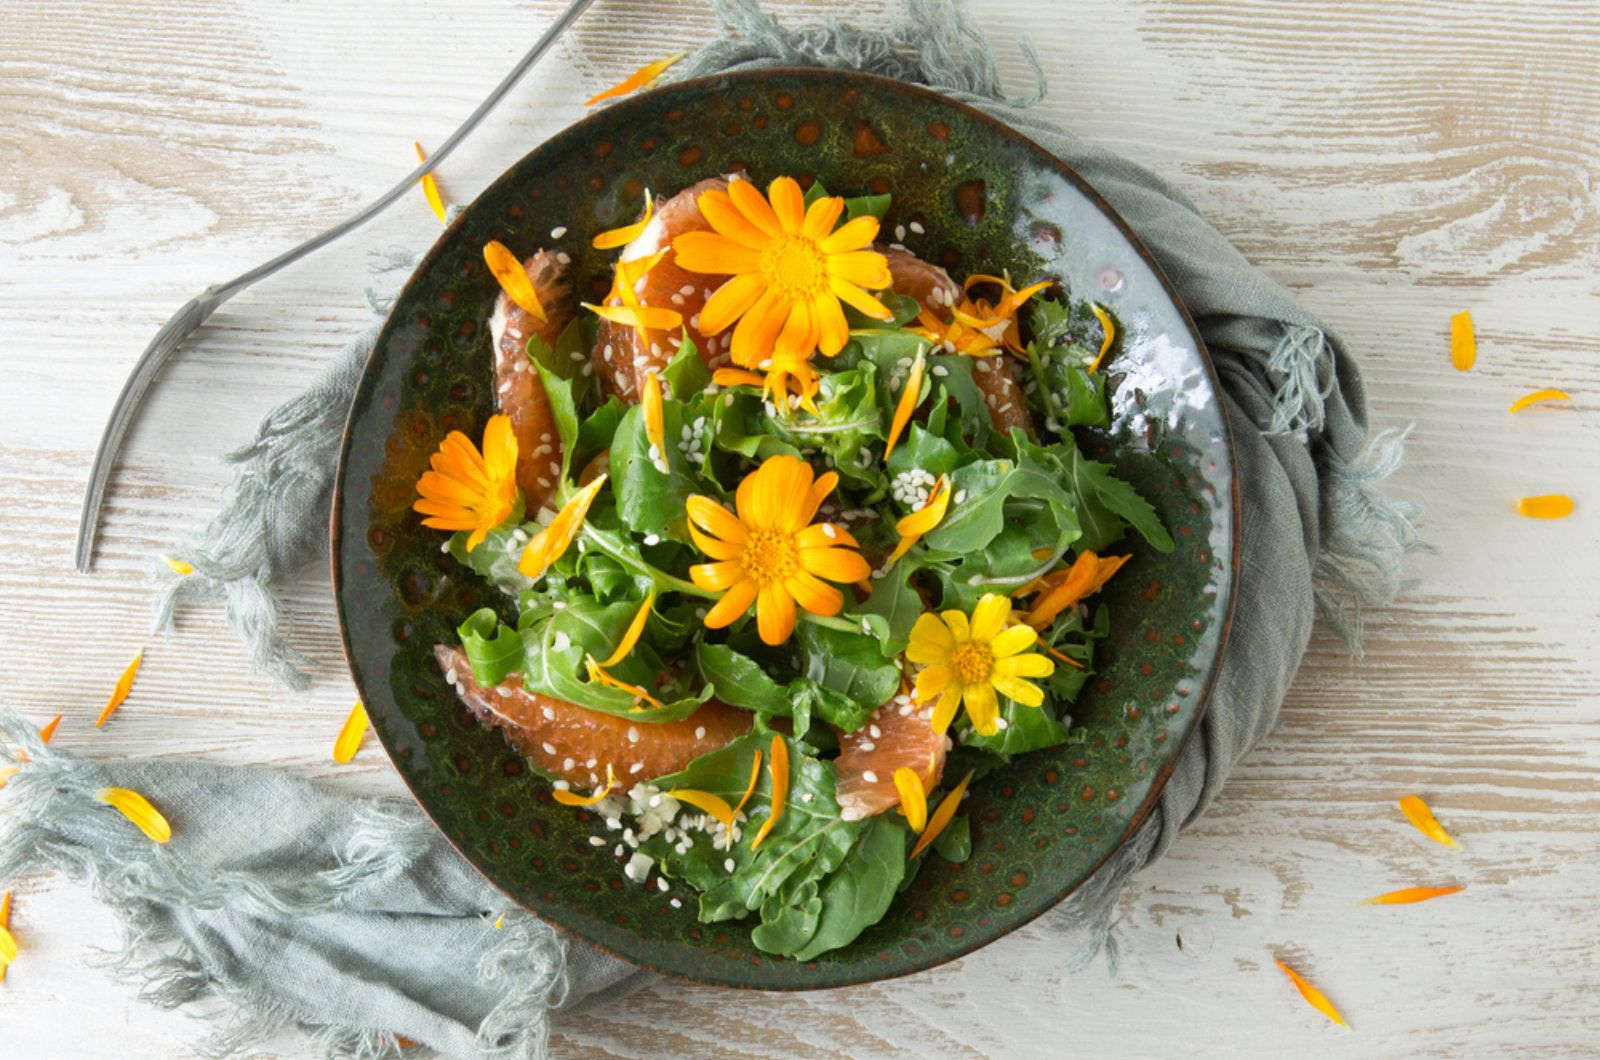 edible marigolds in a plate